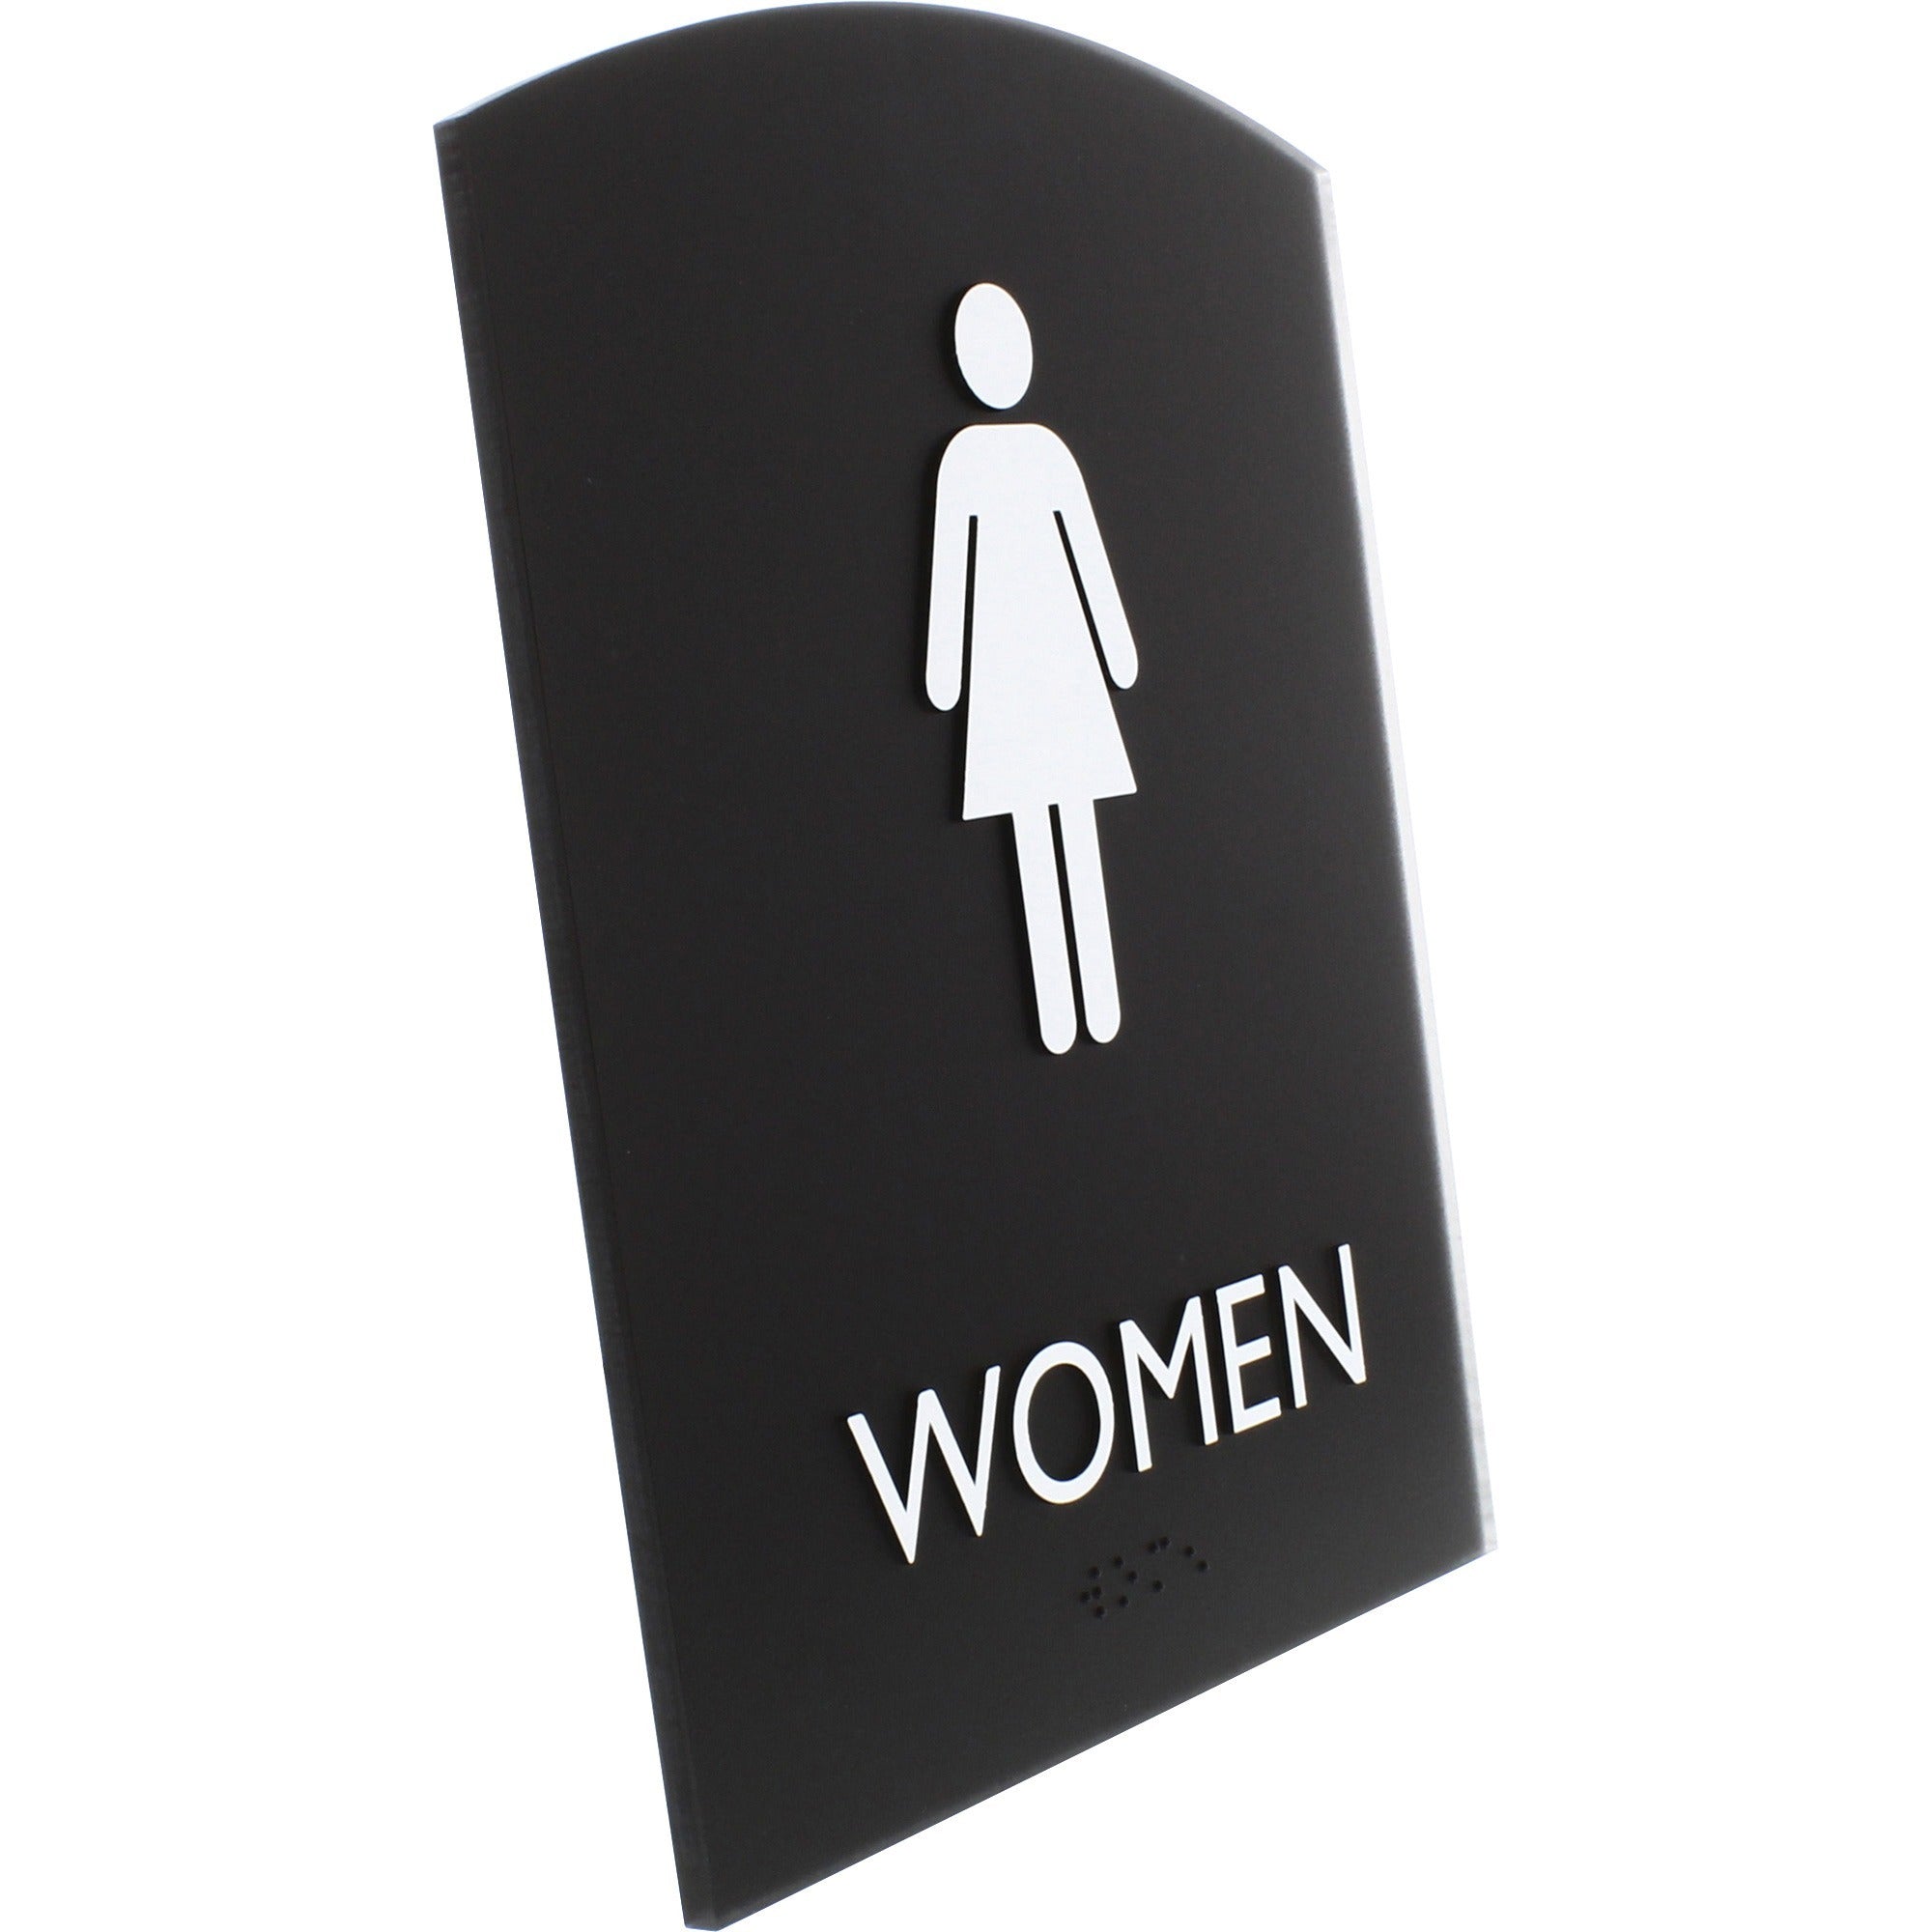 lorell-arched-womens-restroom-sign-1-each-women-print-message-68-width-x-85-height-rectangular-shape-surface-mountable-easy-readability-braille-plastic-black_llr02674 - 3